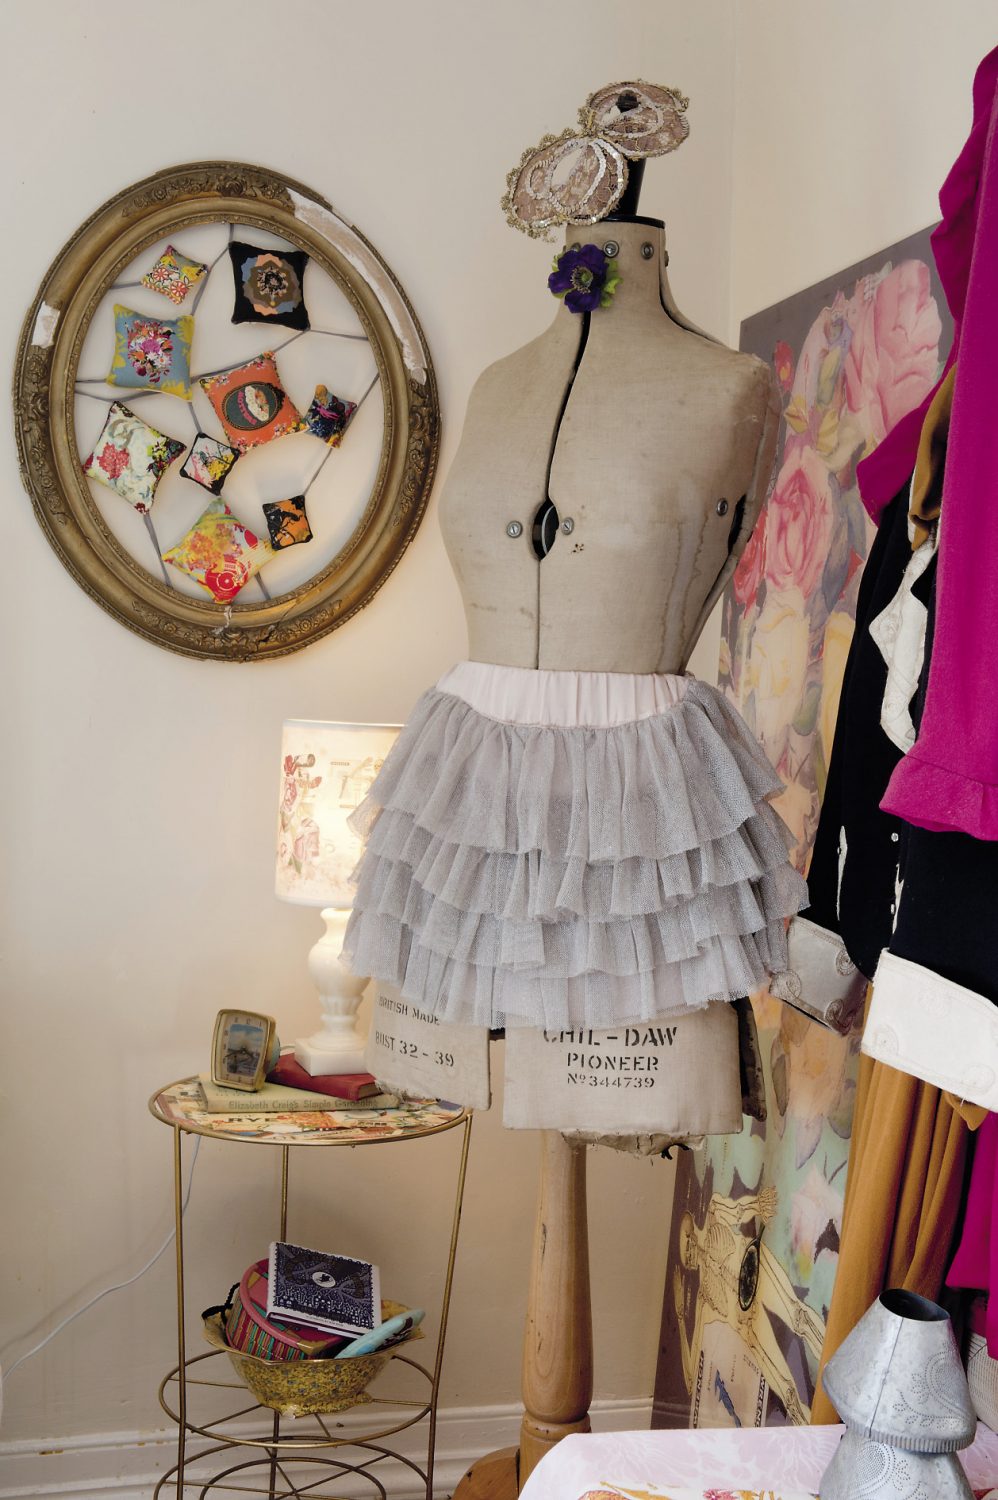 A tailor’s mannequin wears a frilly skirt